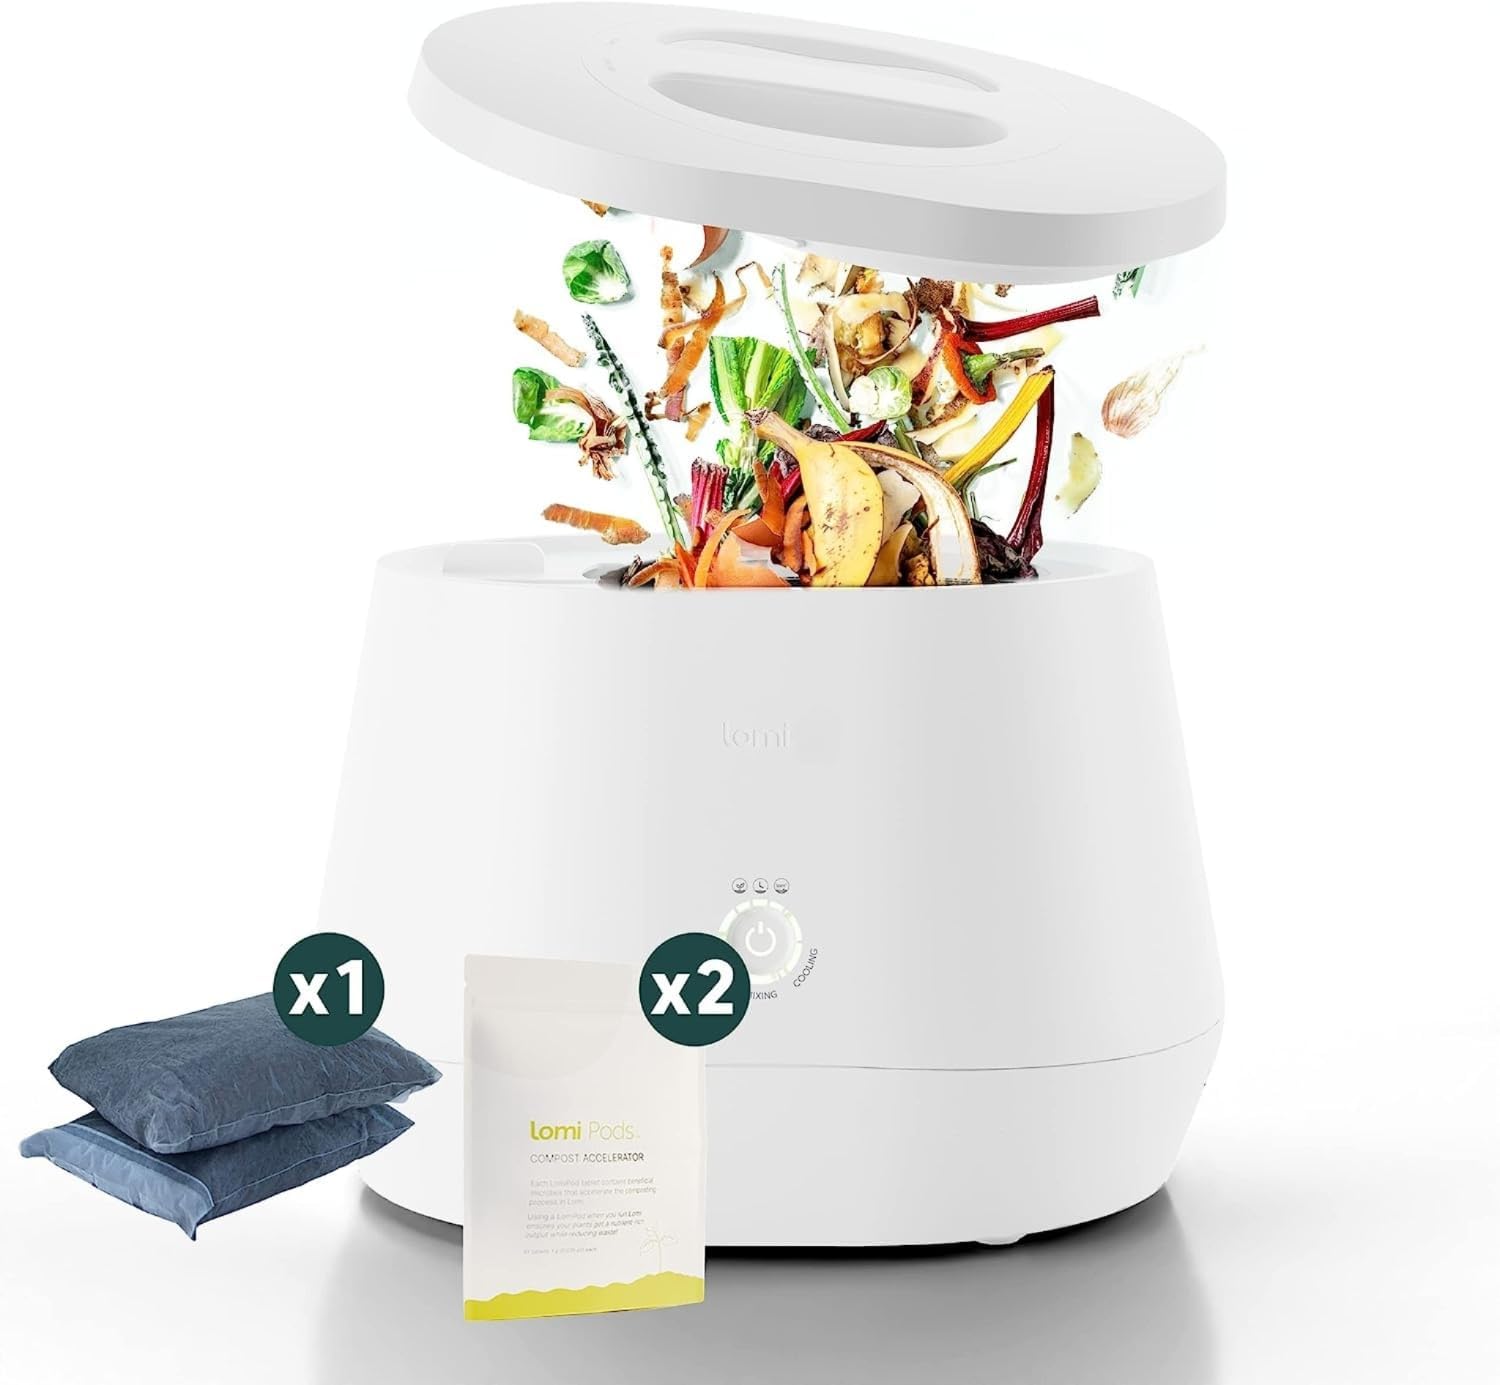 Lomi Classic | World’s First Smart Waste™ Home Food Upcycler | Turn Waste into Natural Fertilizer with a Single Button with Lomi Classic, Electric Kitchen Food Recycler (Bundle with 45 Extra Cycles)